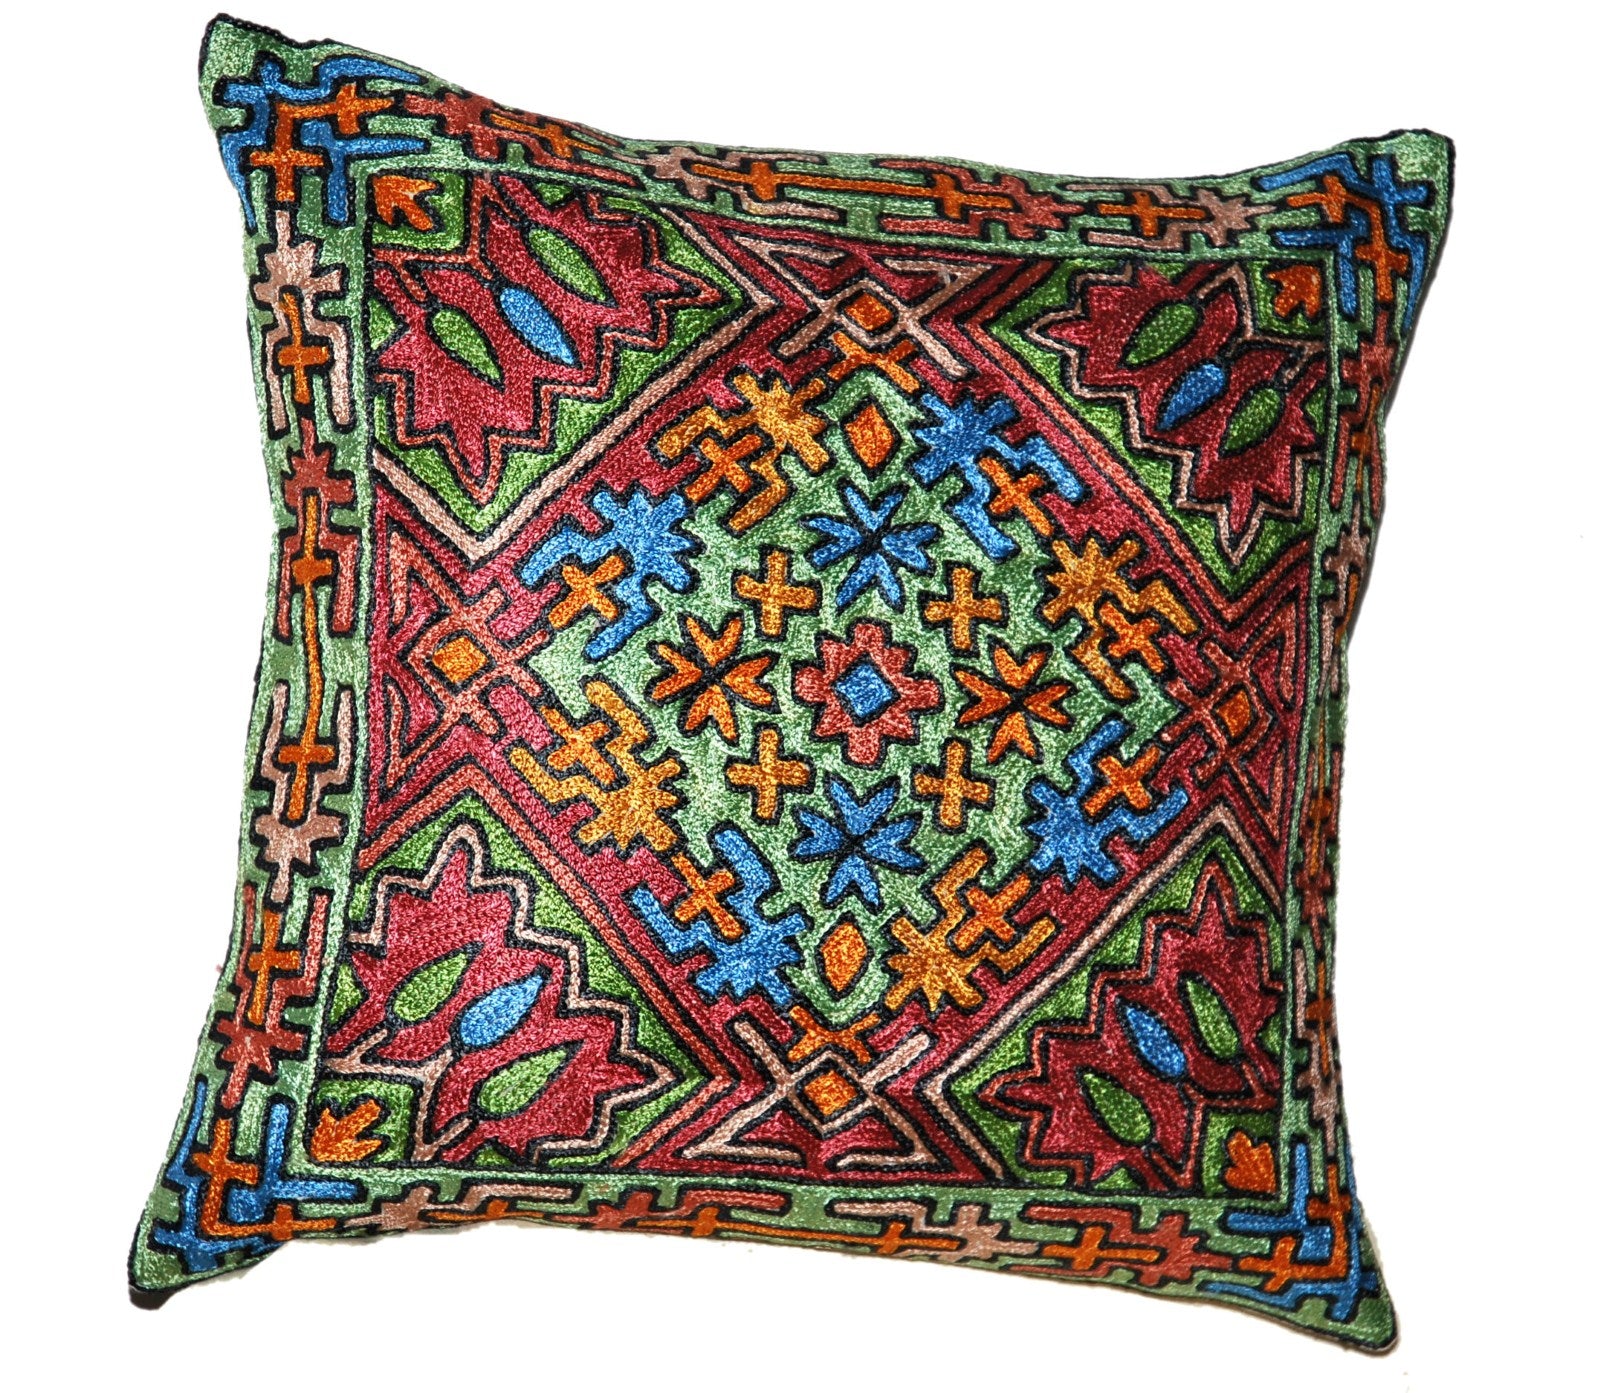 Crewel Silk Embroidered Cushion Throw Pillow Cover, Multicolor #CW2015